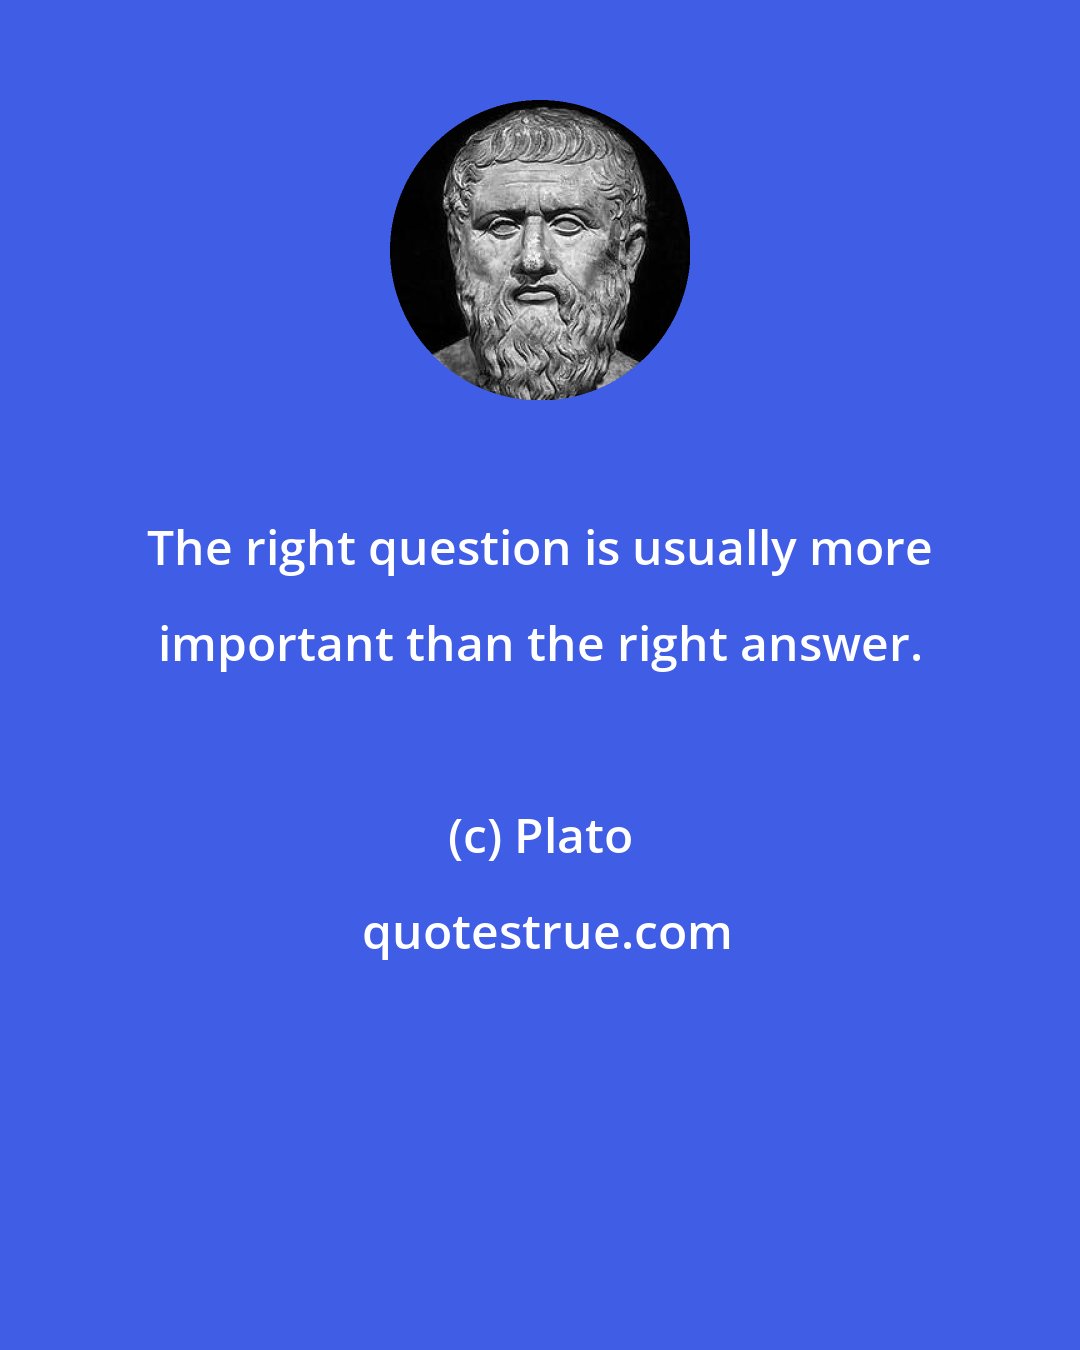 Plato: The right question is usually more important than the right answer.